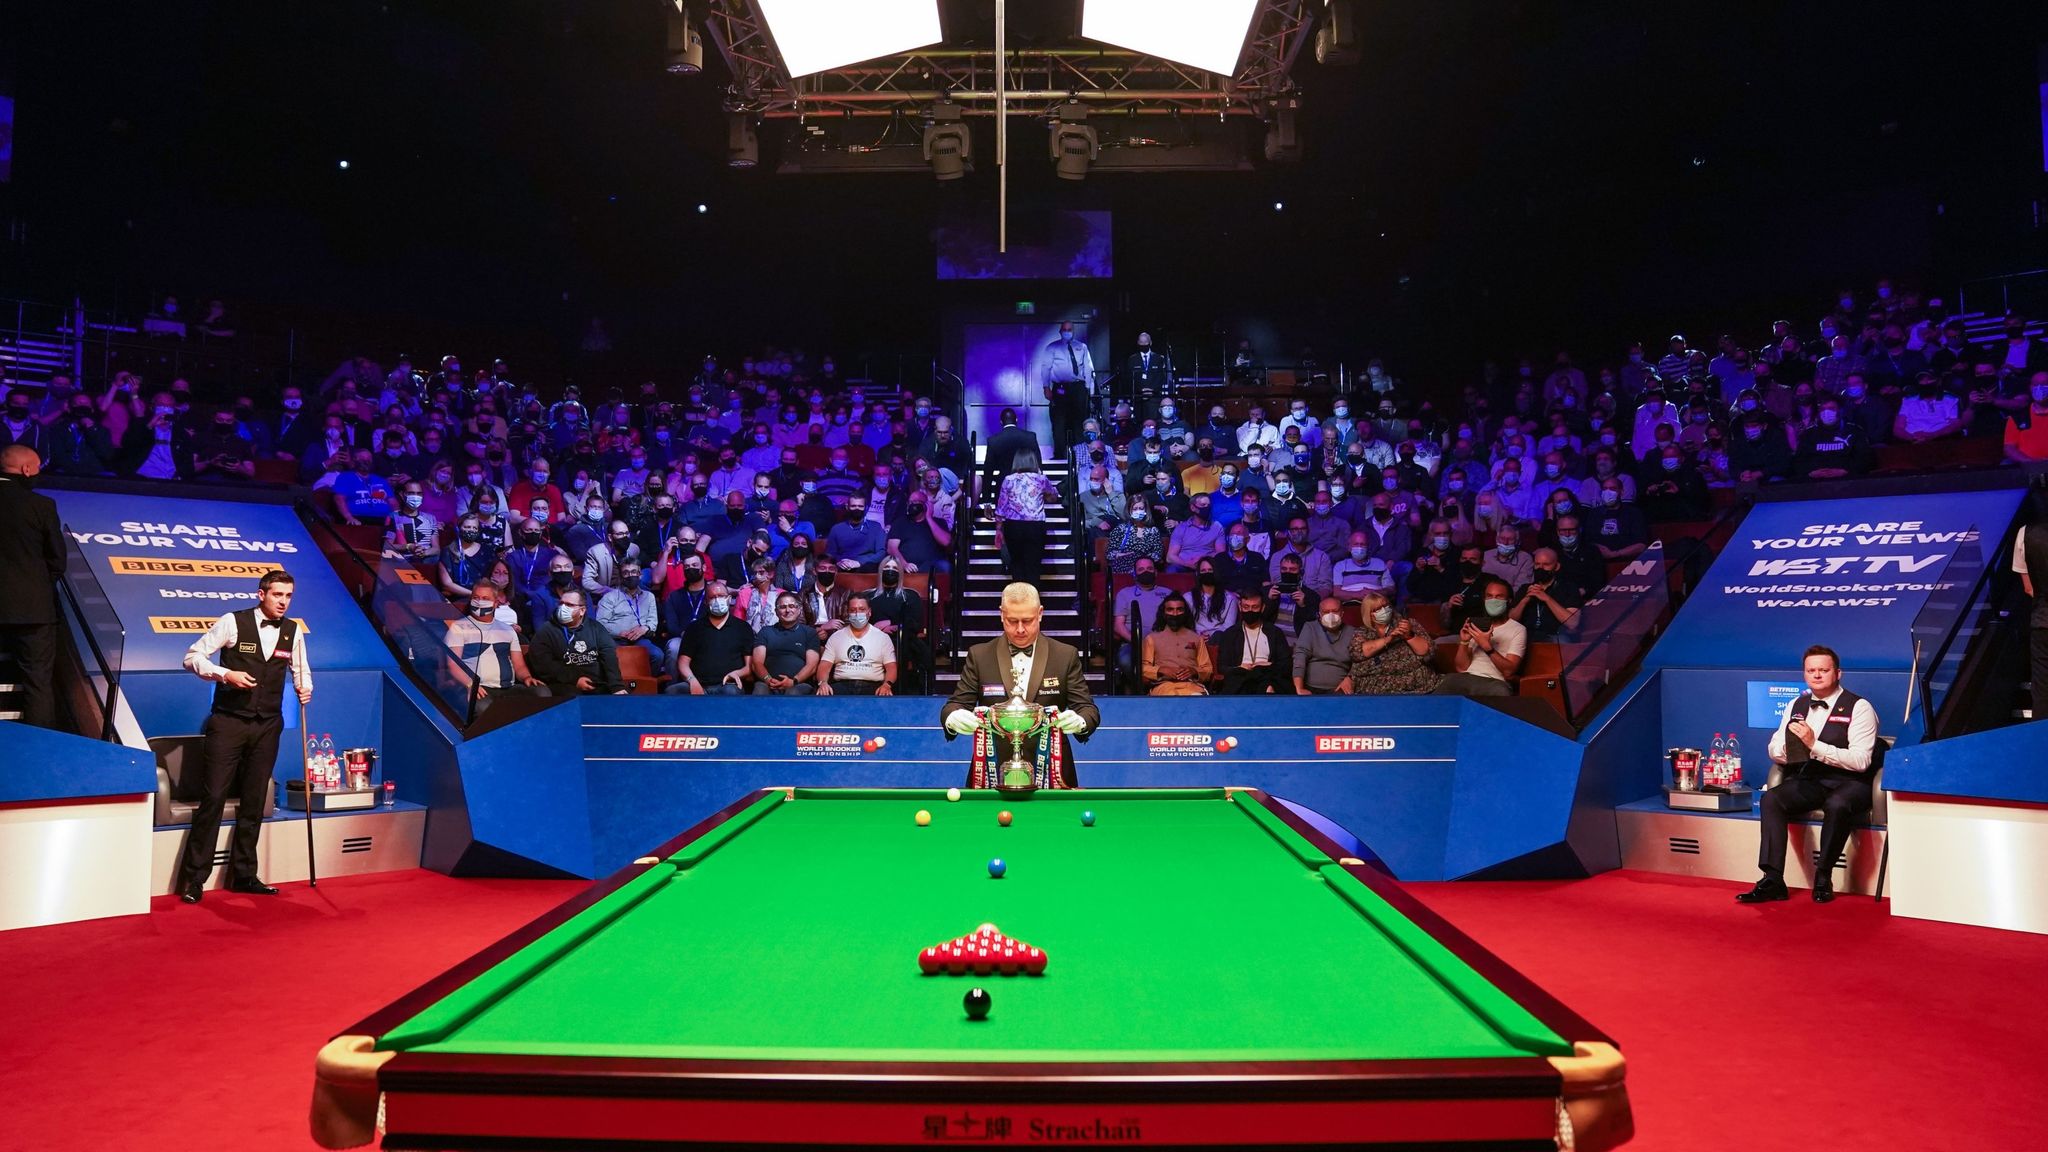 World Snooker Championship Mark Selby leads Shaun Murphy 10-7 in Crucible final held in front of near-capacity crowd Snooker News Sky Sports